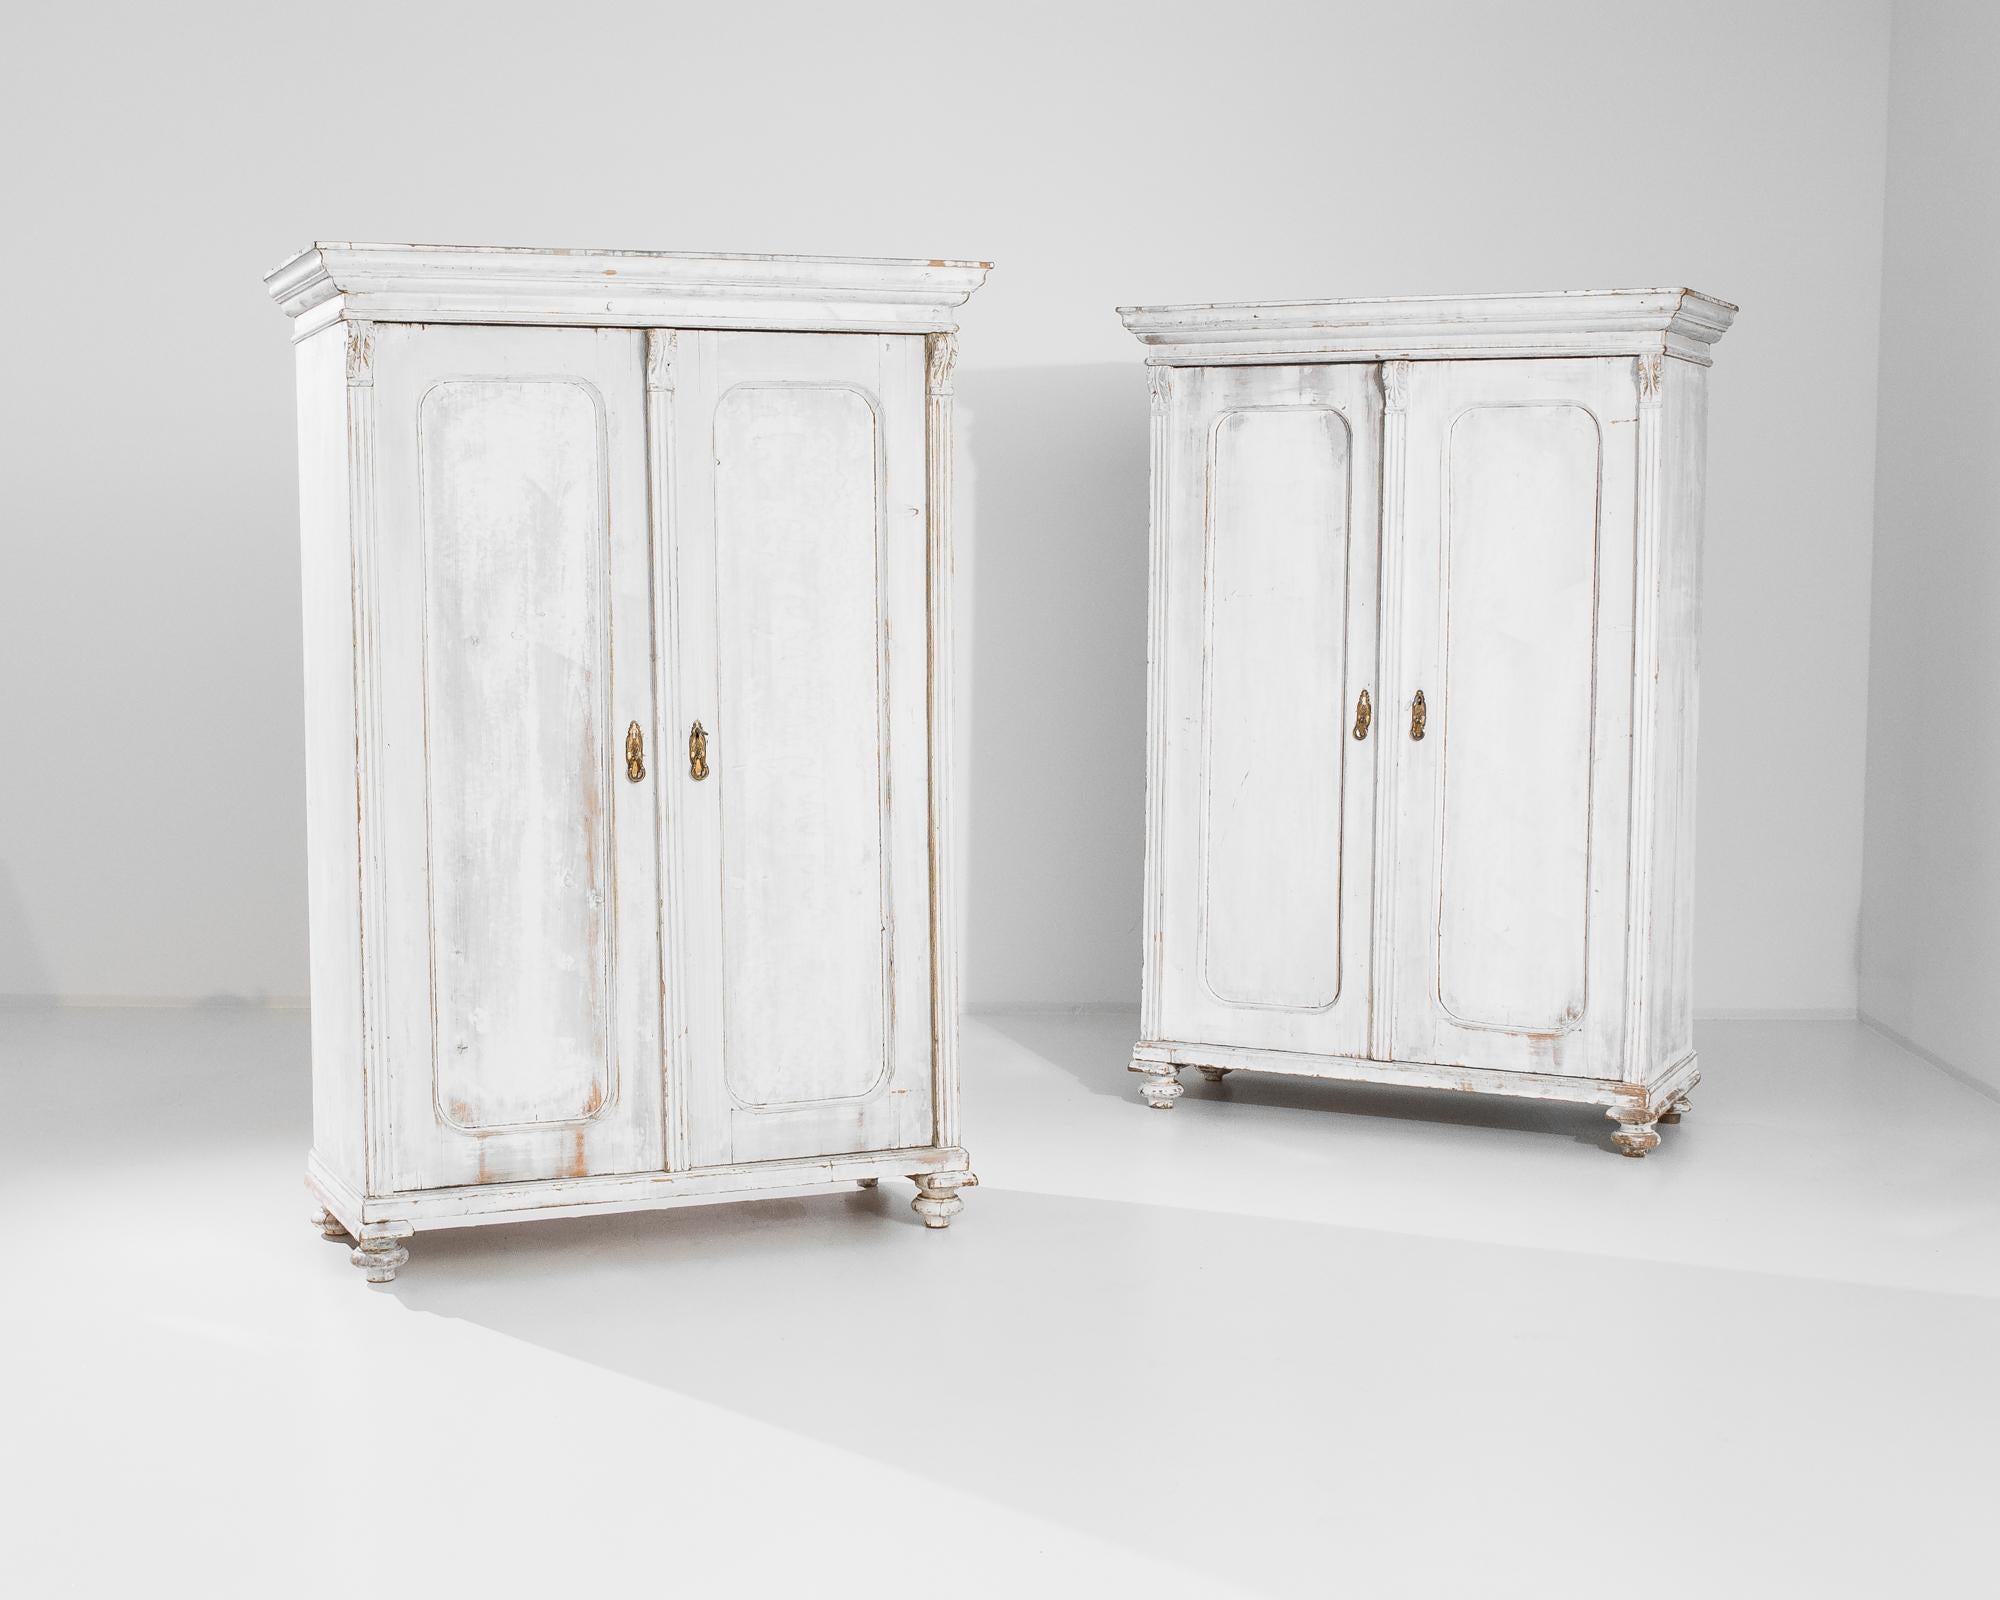 French Provincial 1900s French White Wooden Armoire